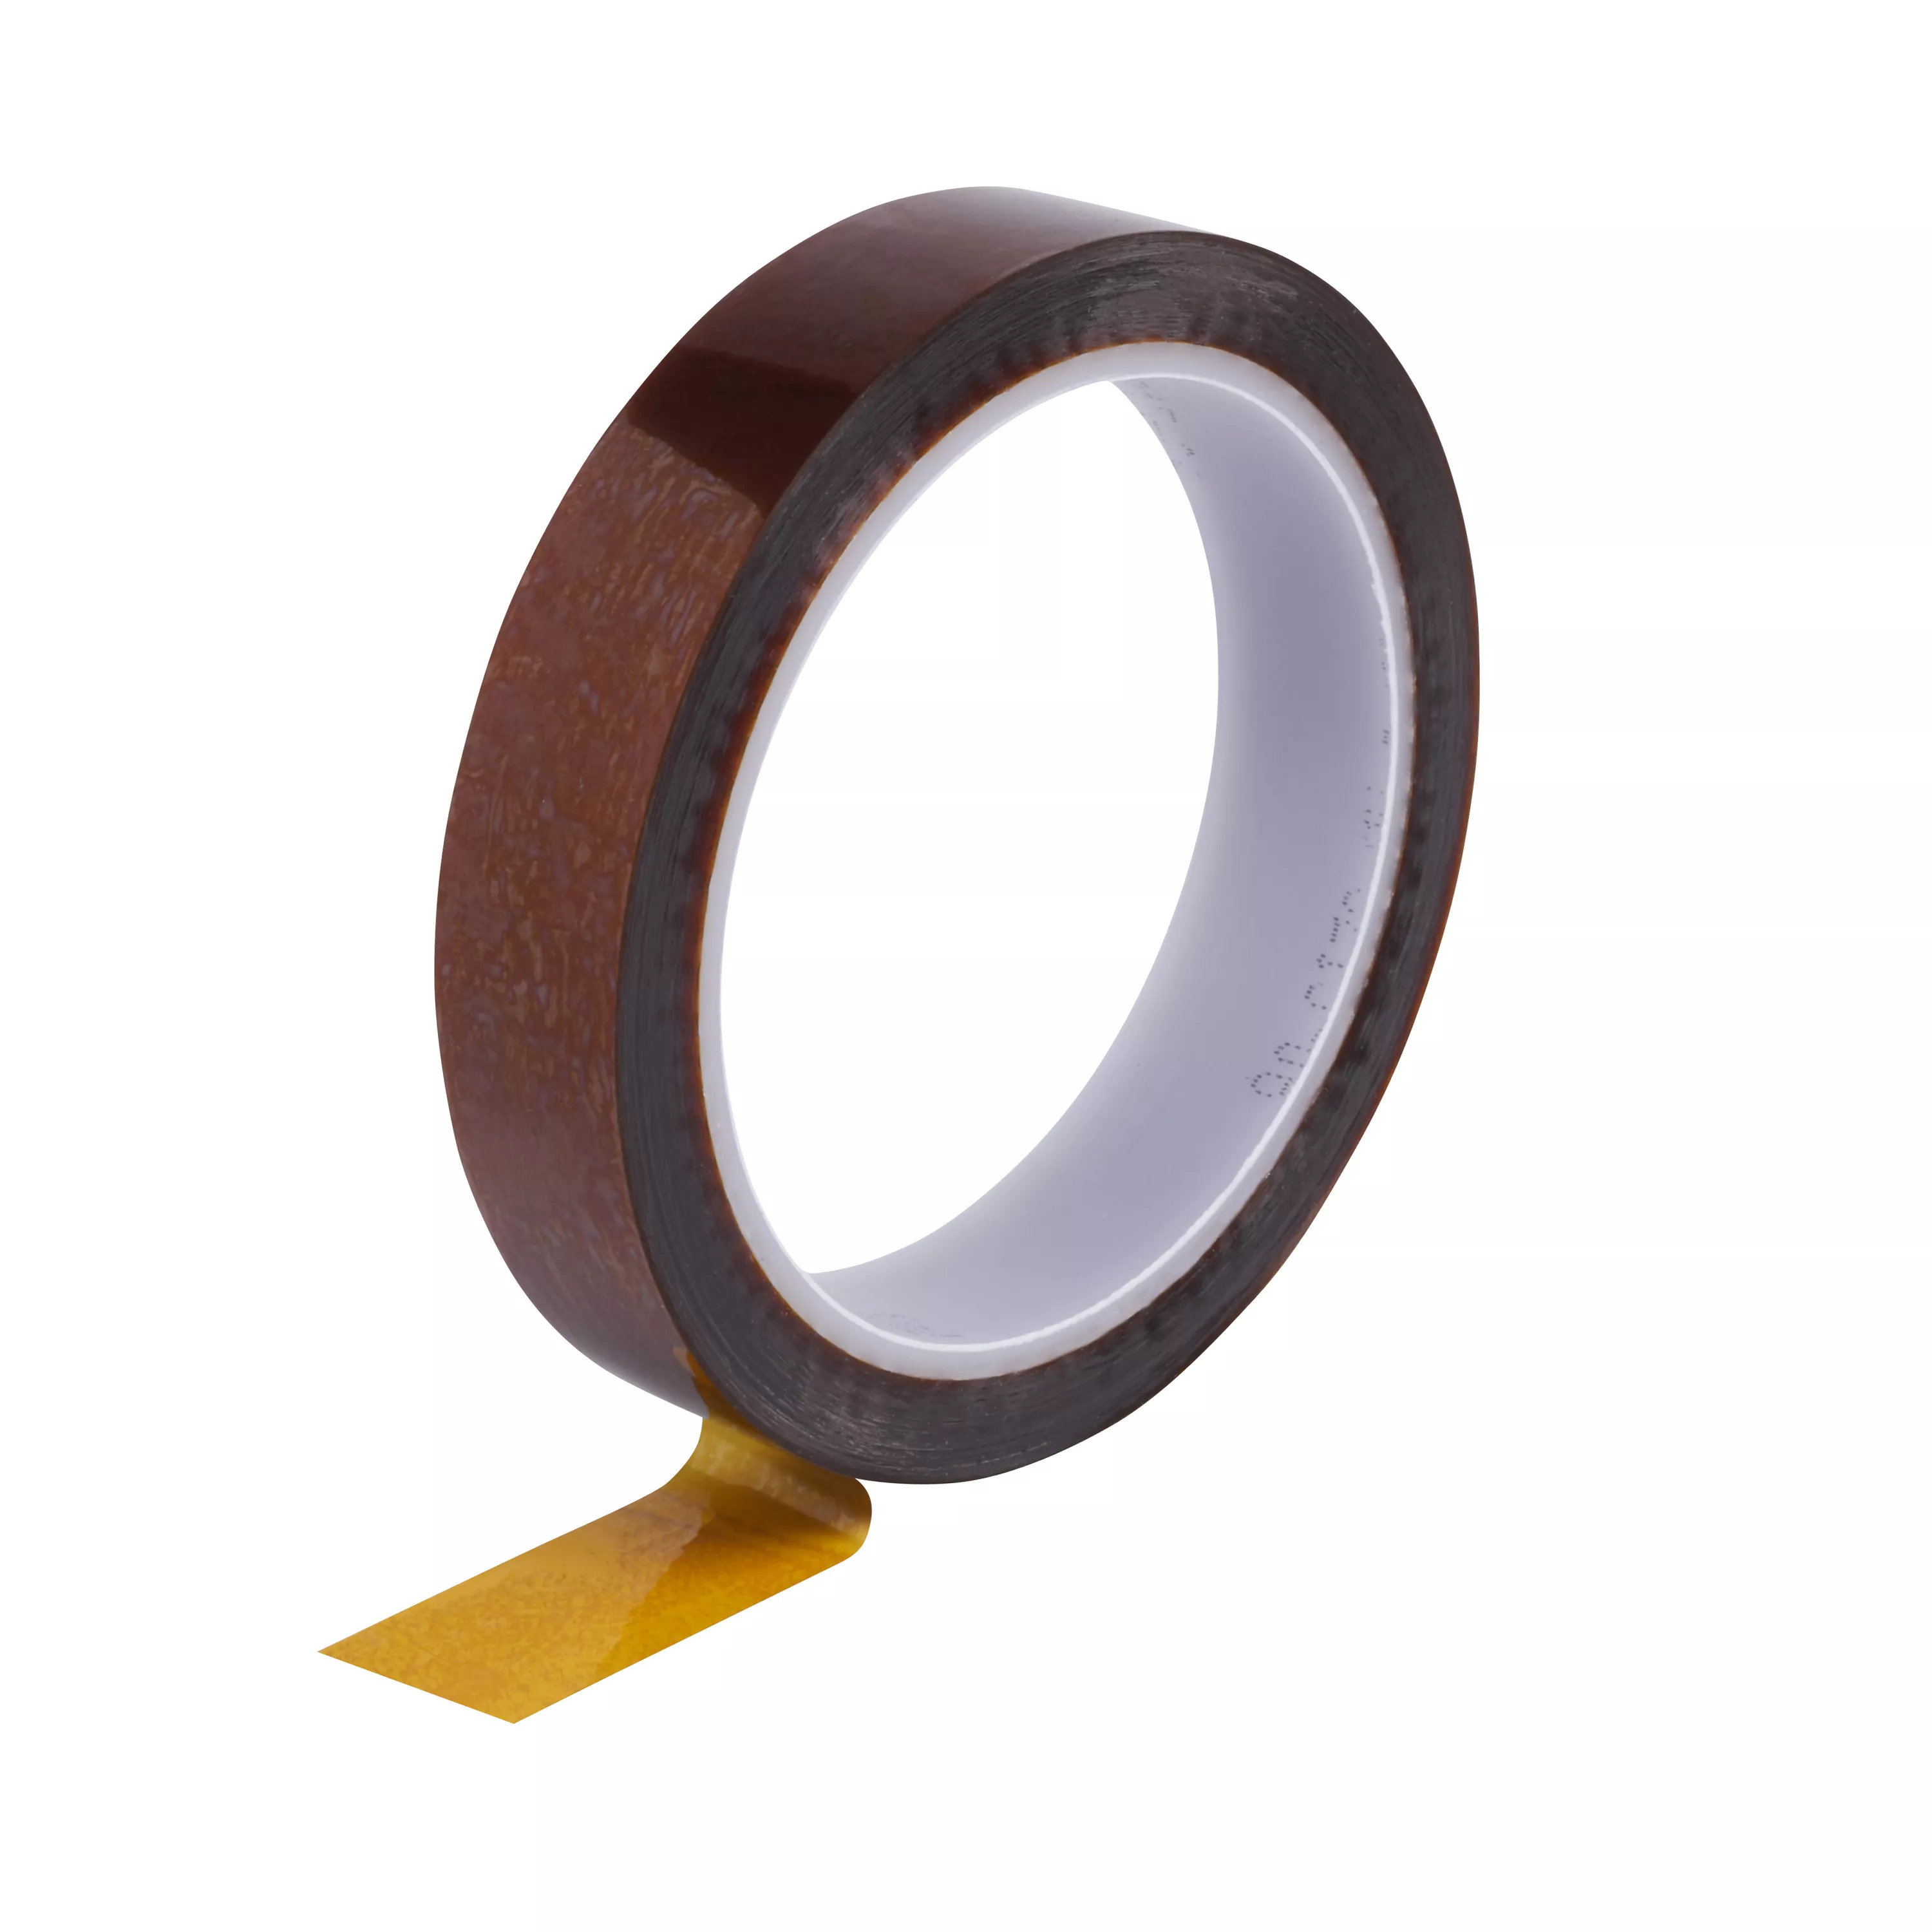 SKU 7100035643 | 3M™ Polyimide Film Electrical Tape 1205